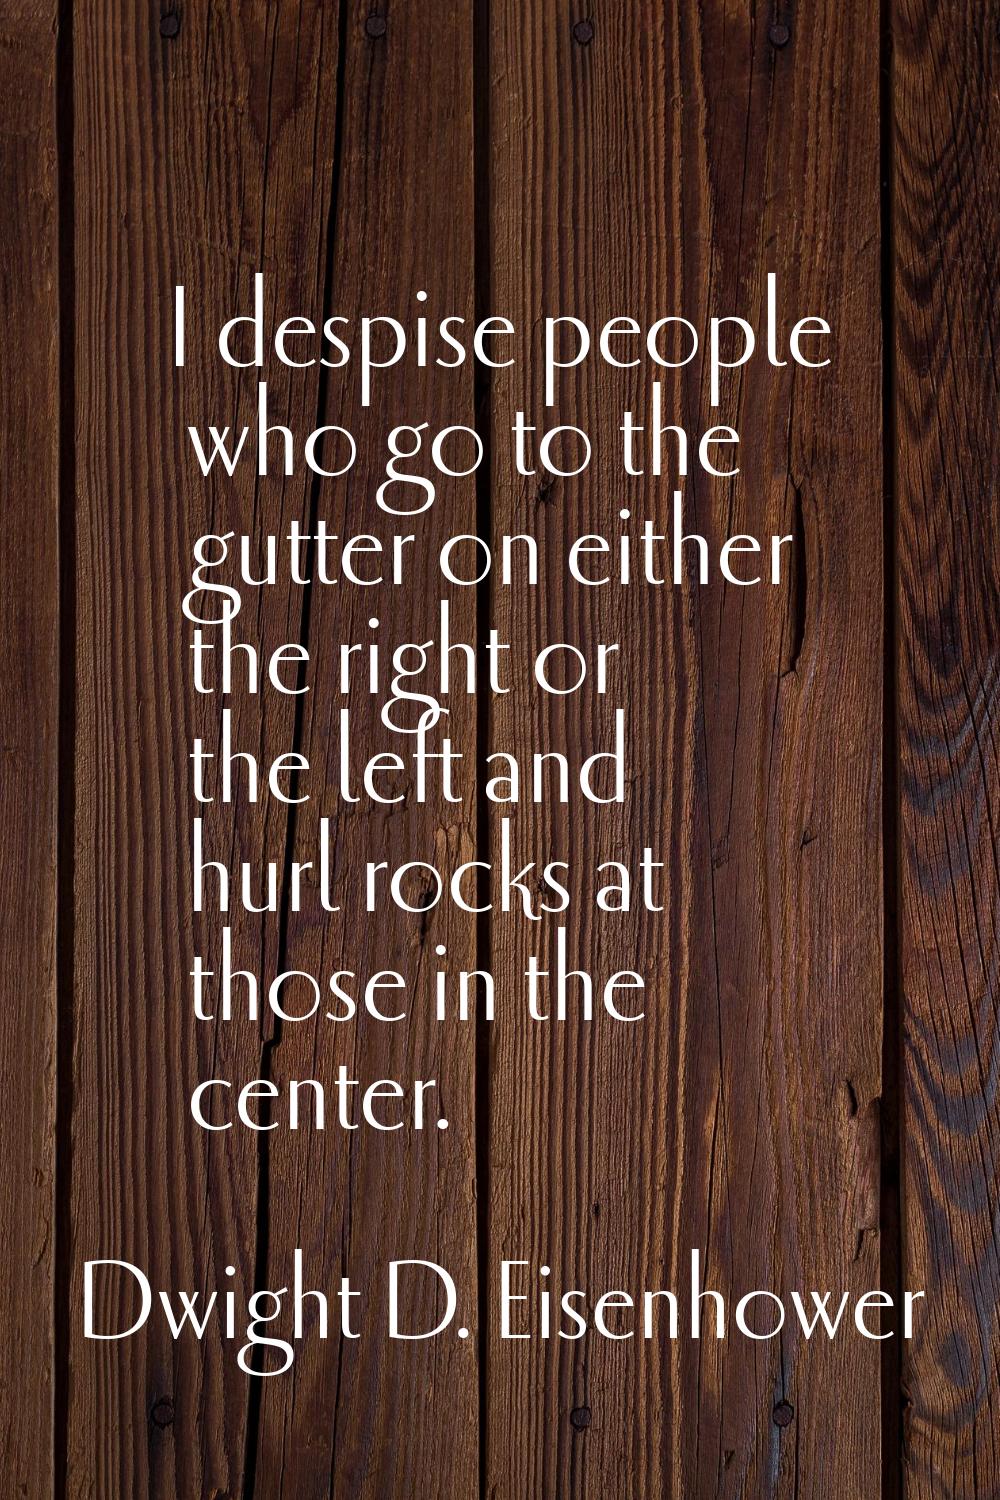 I despise people who go to the gutter on either the right or the left and hurl rocks at those in th